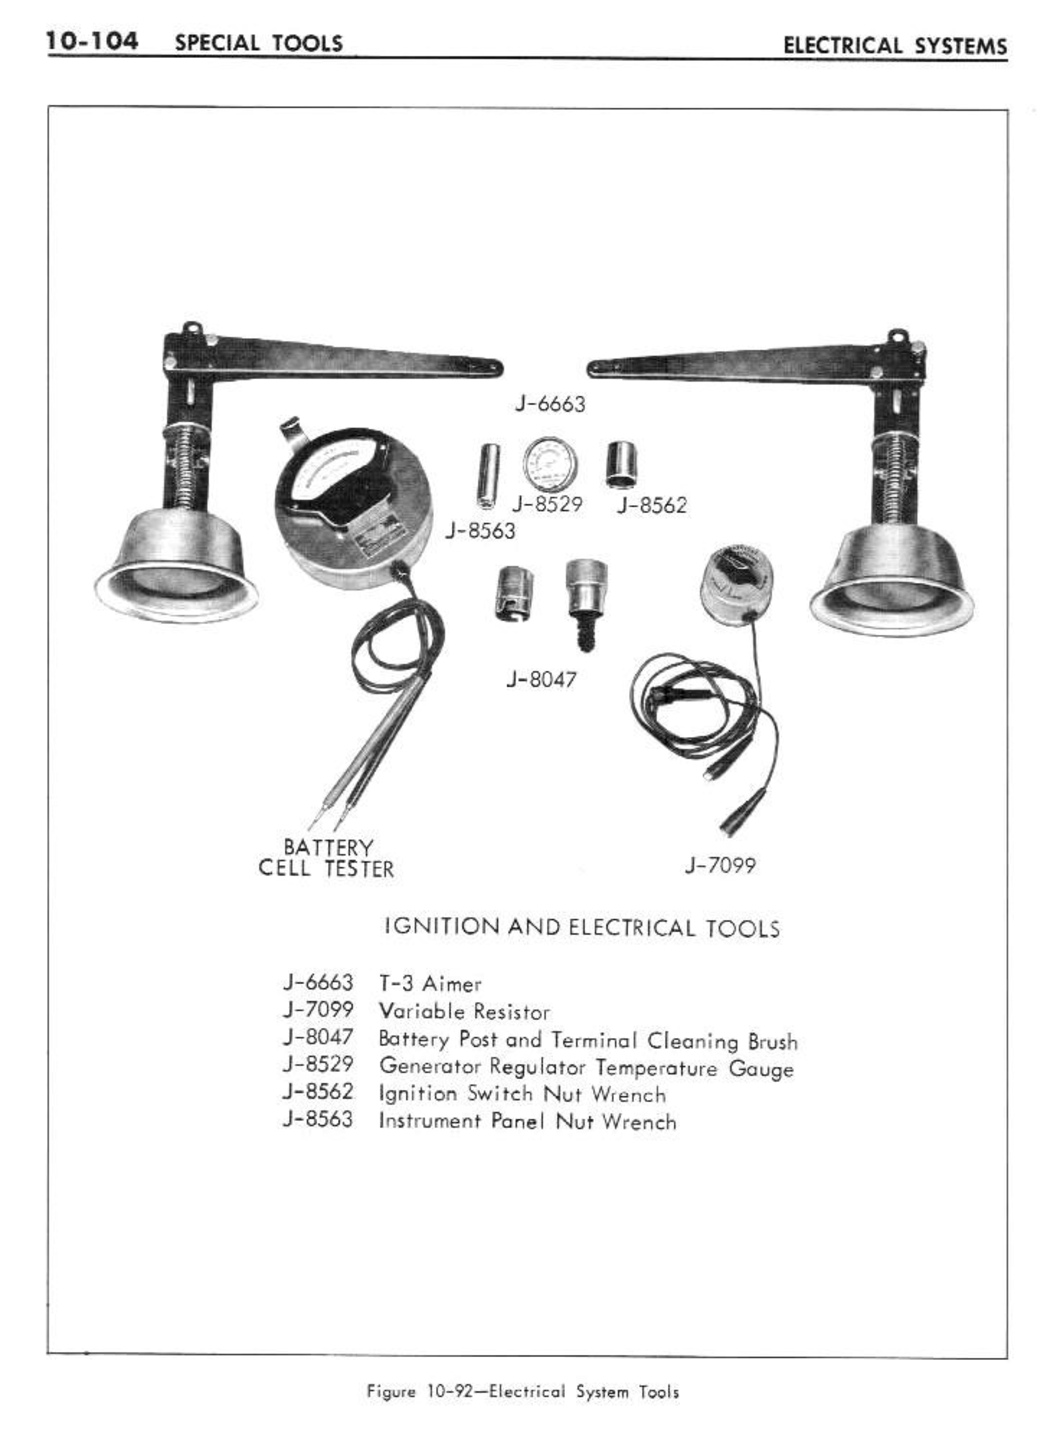 n_10 1961 Buick Shop Manual - Electrical Systems-104-104.jpg